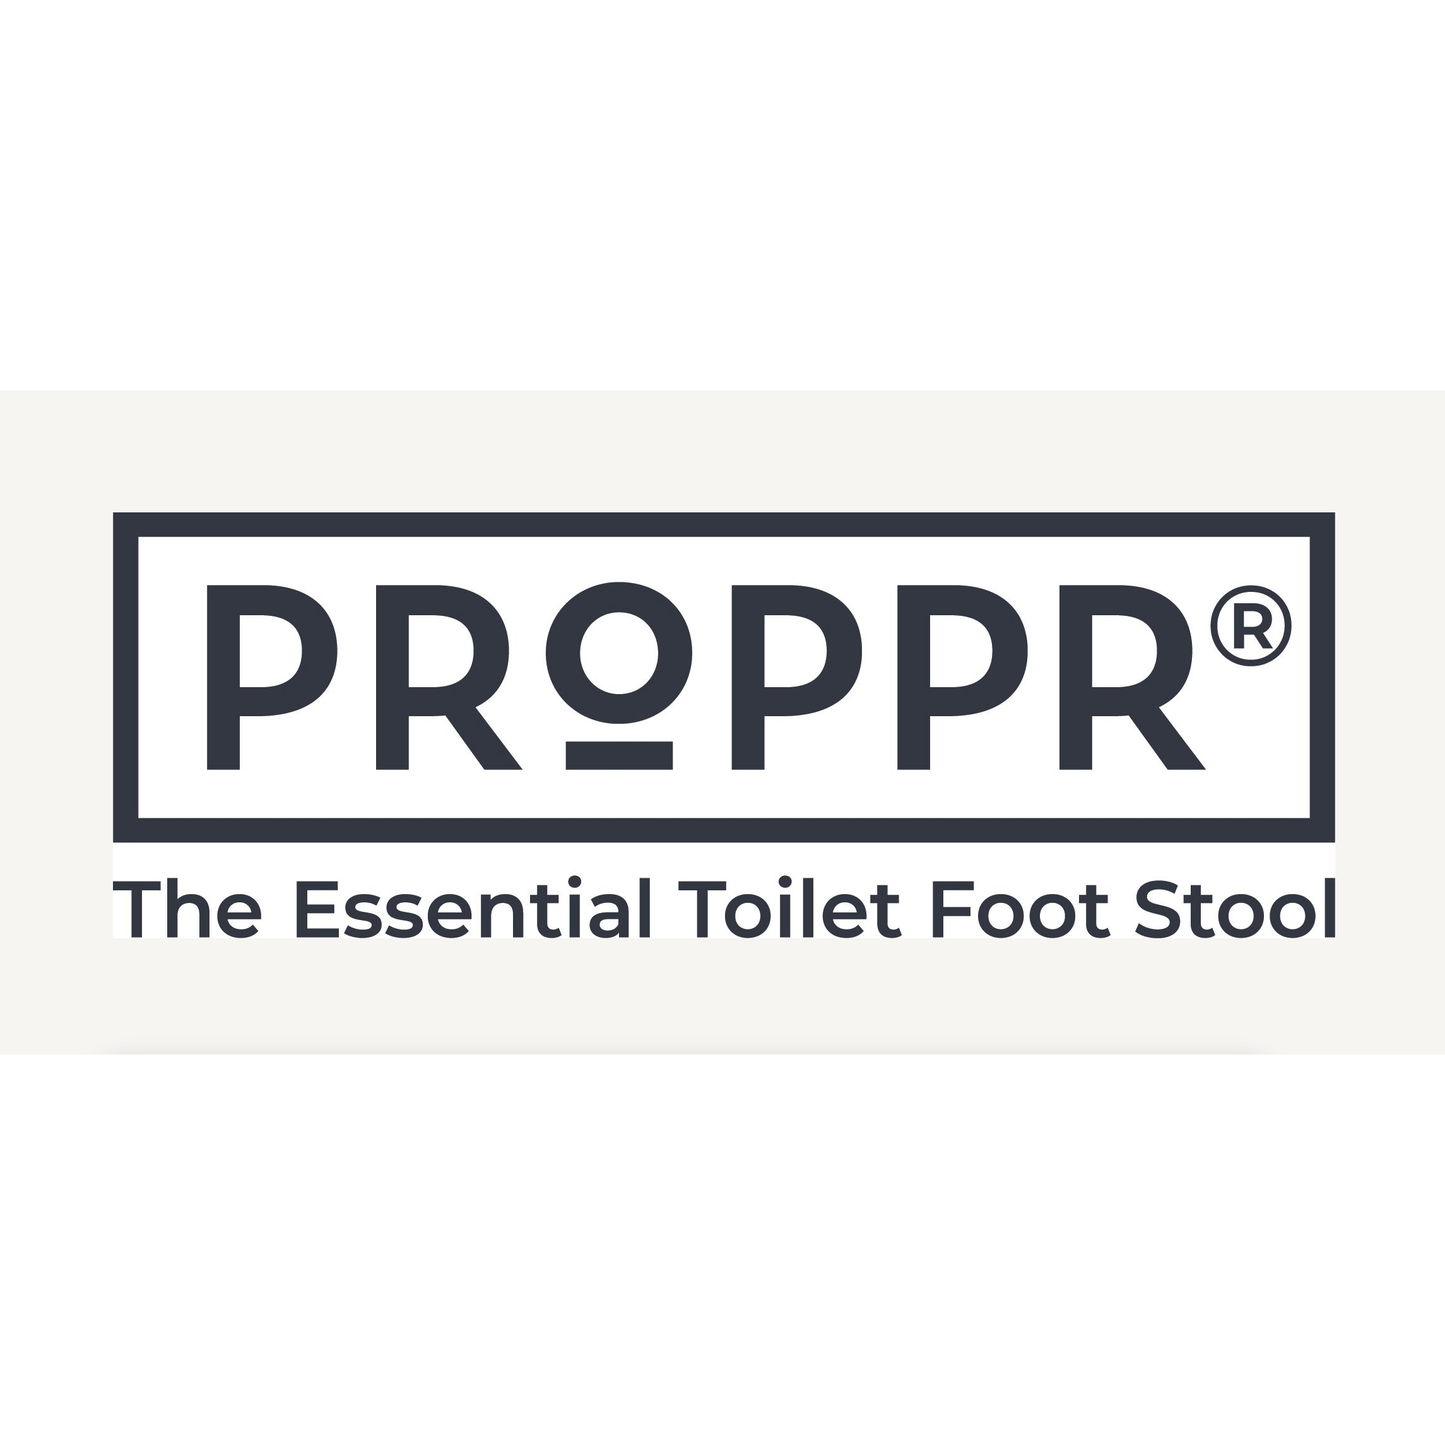 The PROPPR Acer - Clear Toilet Foot Stool - proppr logo